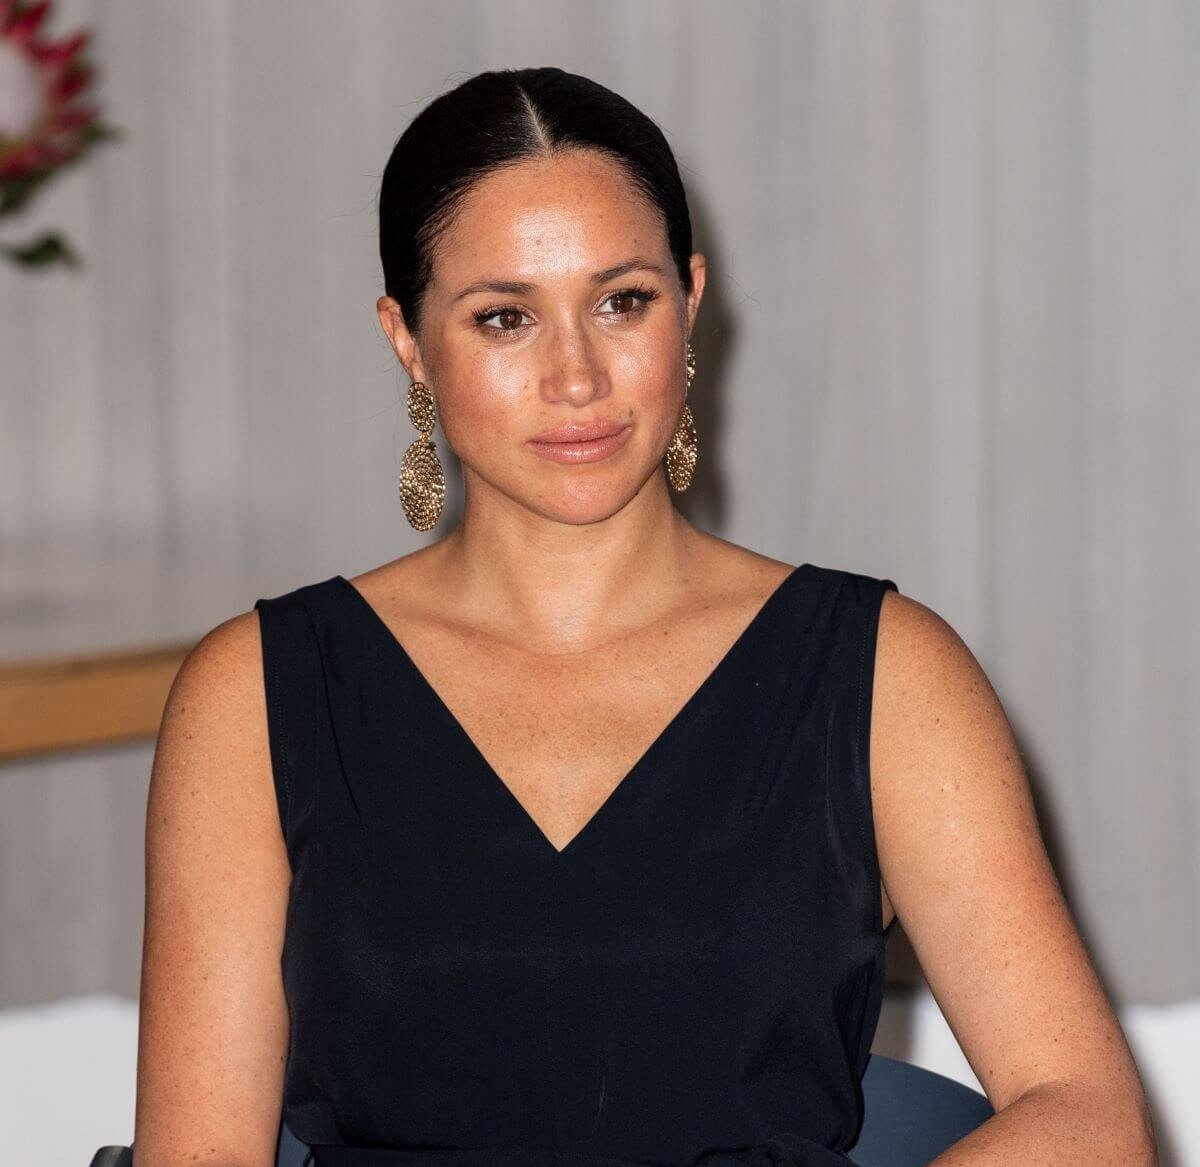 Meghan Markle visits the Woodstock Exchange to meet female entrepreneurs working in technology during the royal tour of South Africa